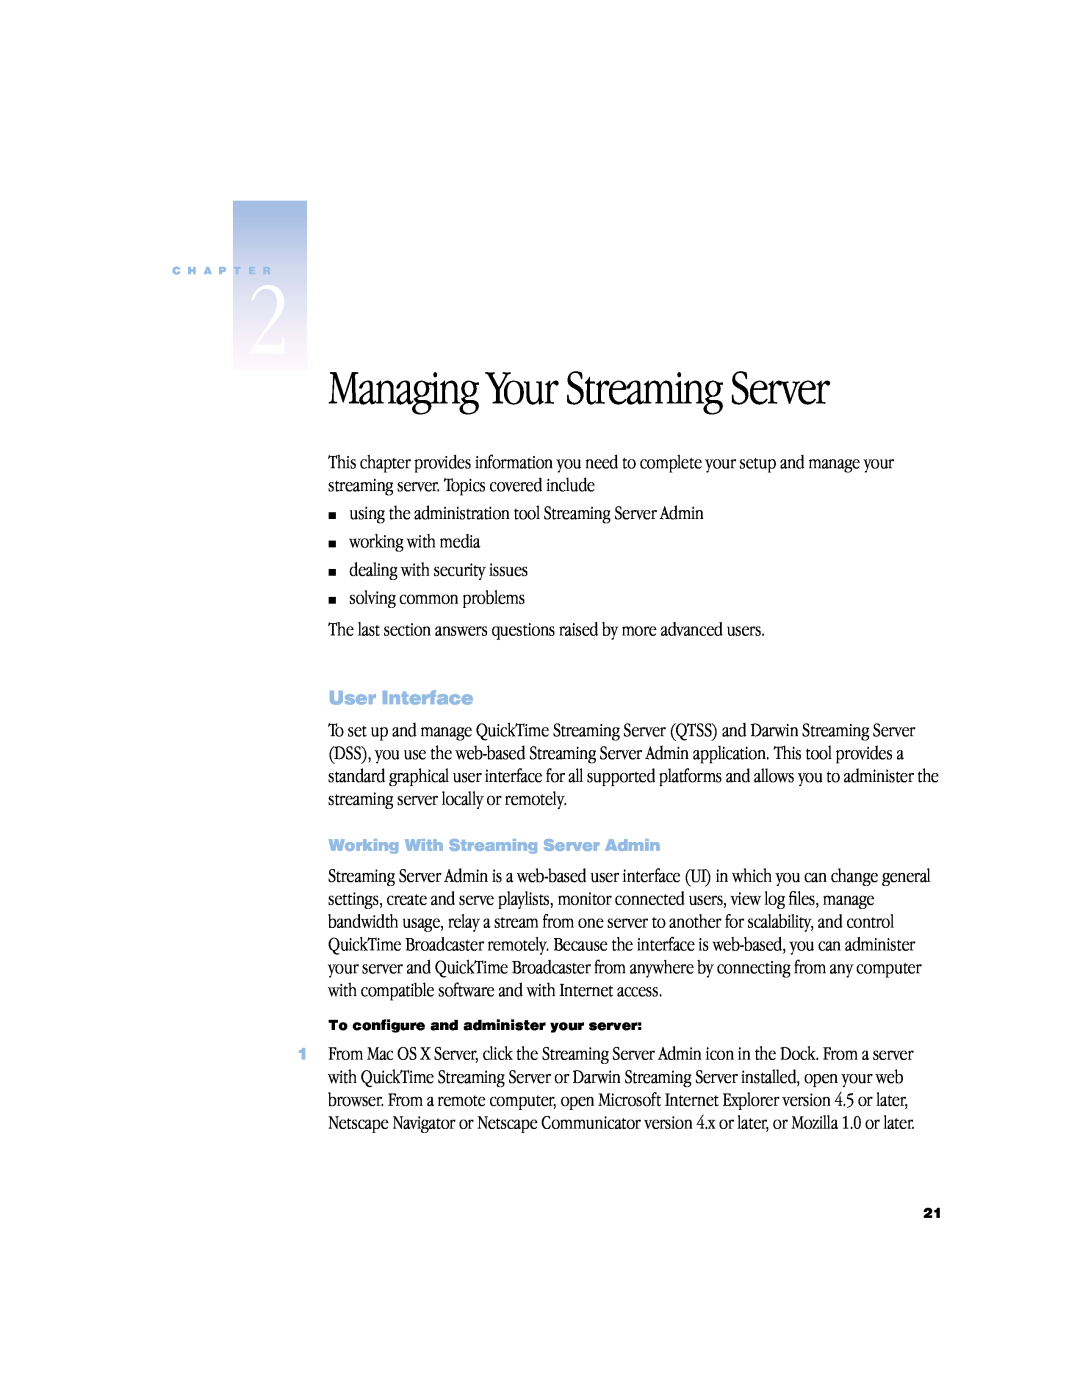 Apple QuickTime Streaming Server Darwin Streaming Server manual User Interface, Managing Your Streaming Server 